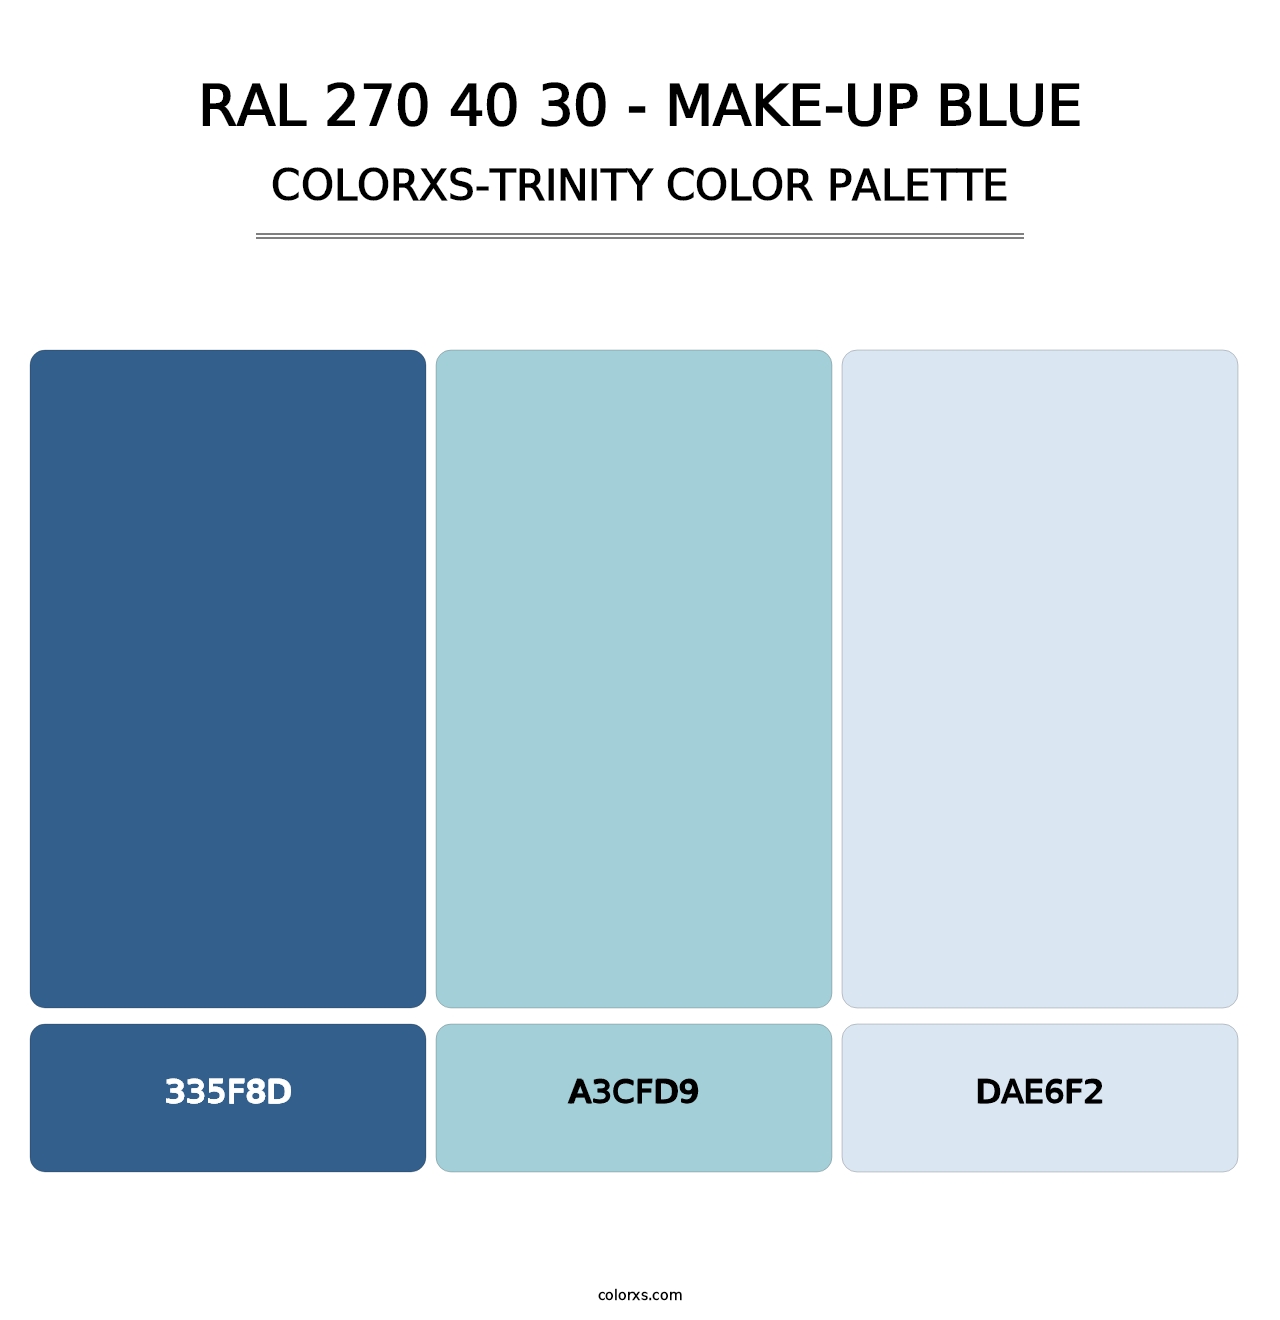 RAL 270 40 30 - Make-Up Blue - Colorxs Trinity Palette